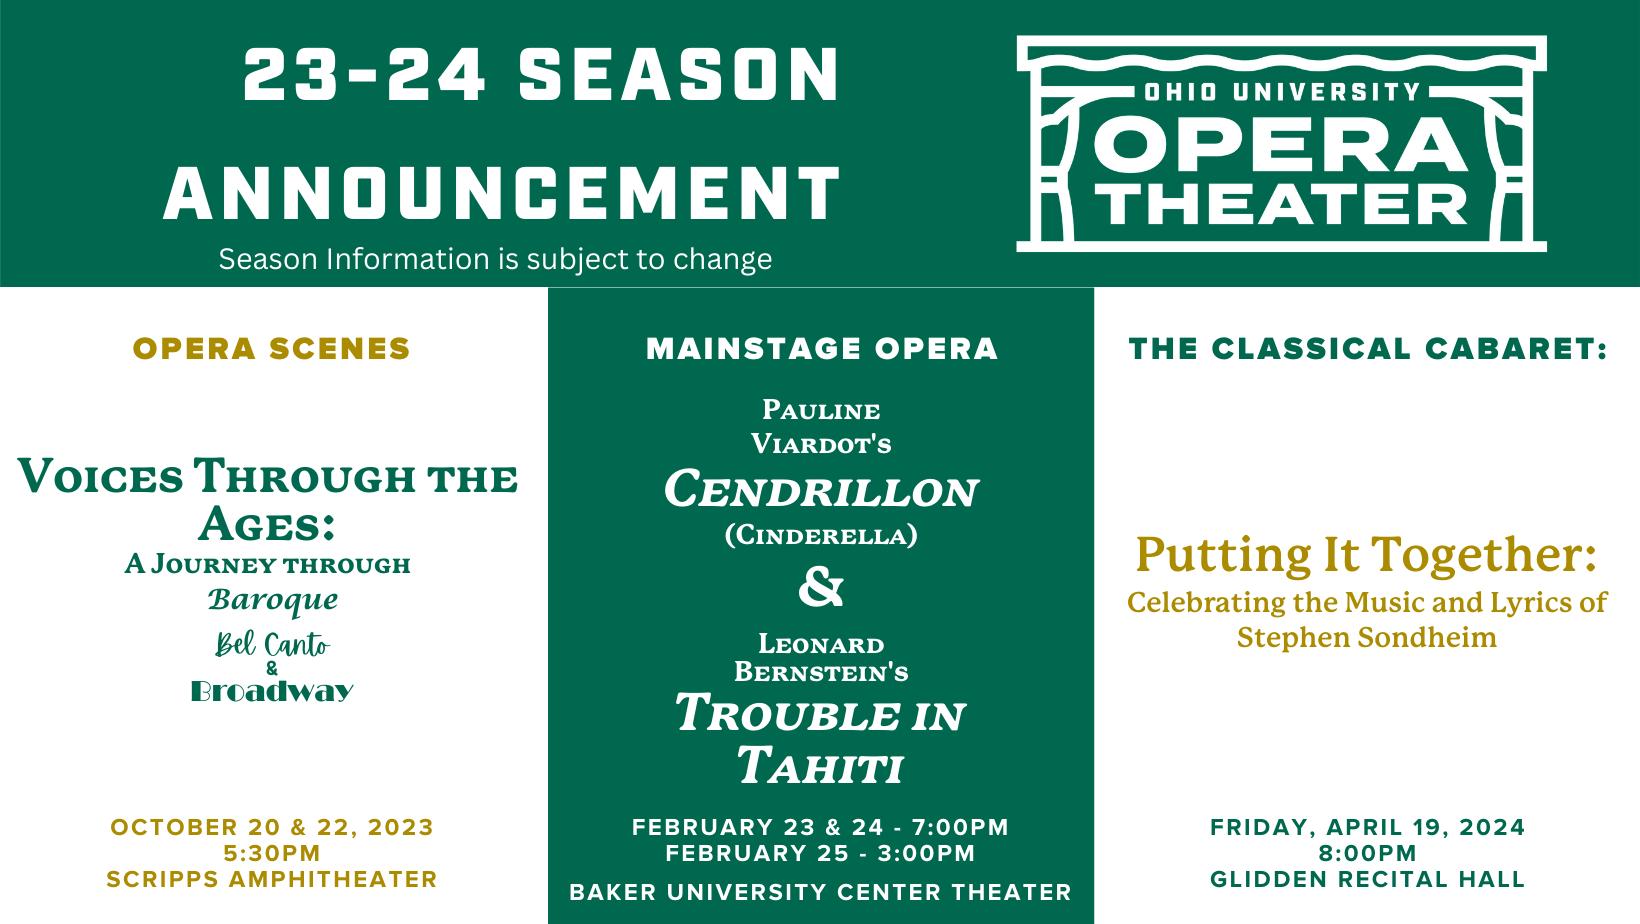 Green rectangle at top 23-24 Season Announcement and Ohio University Opera Theater Logo inside. White rectangle at left of page below upper green with title of Fall Opera Scenes production. Green Rectangle at center below upper green rectangle with title of Winter Mainstage Opera Production, White rectangle at right of page below upper green rectangle with title of production for The Classical Cabaret.